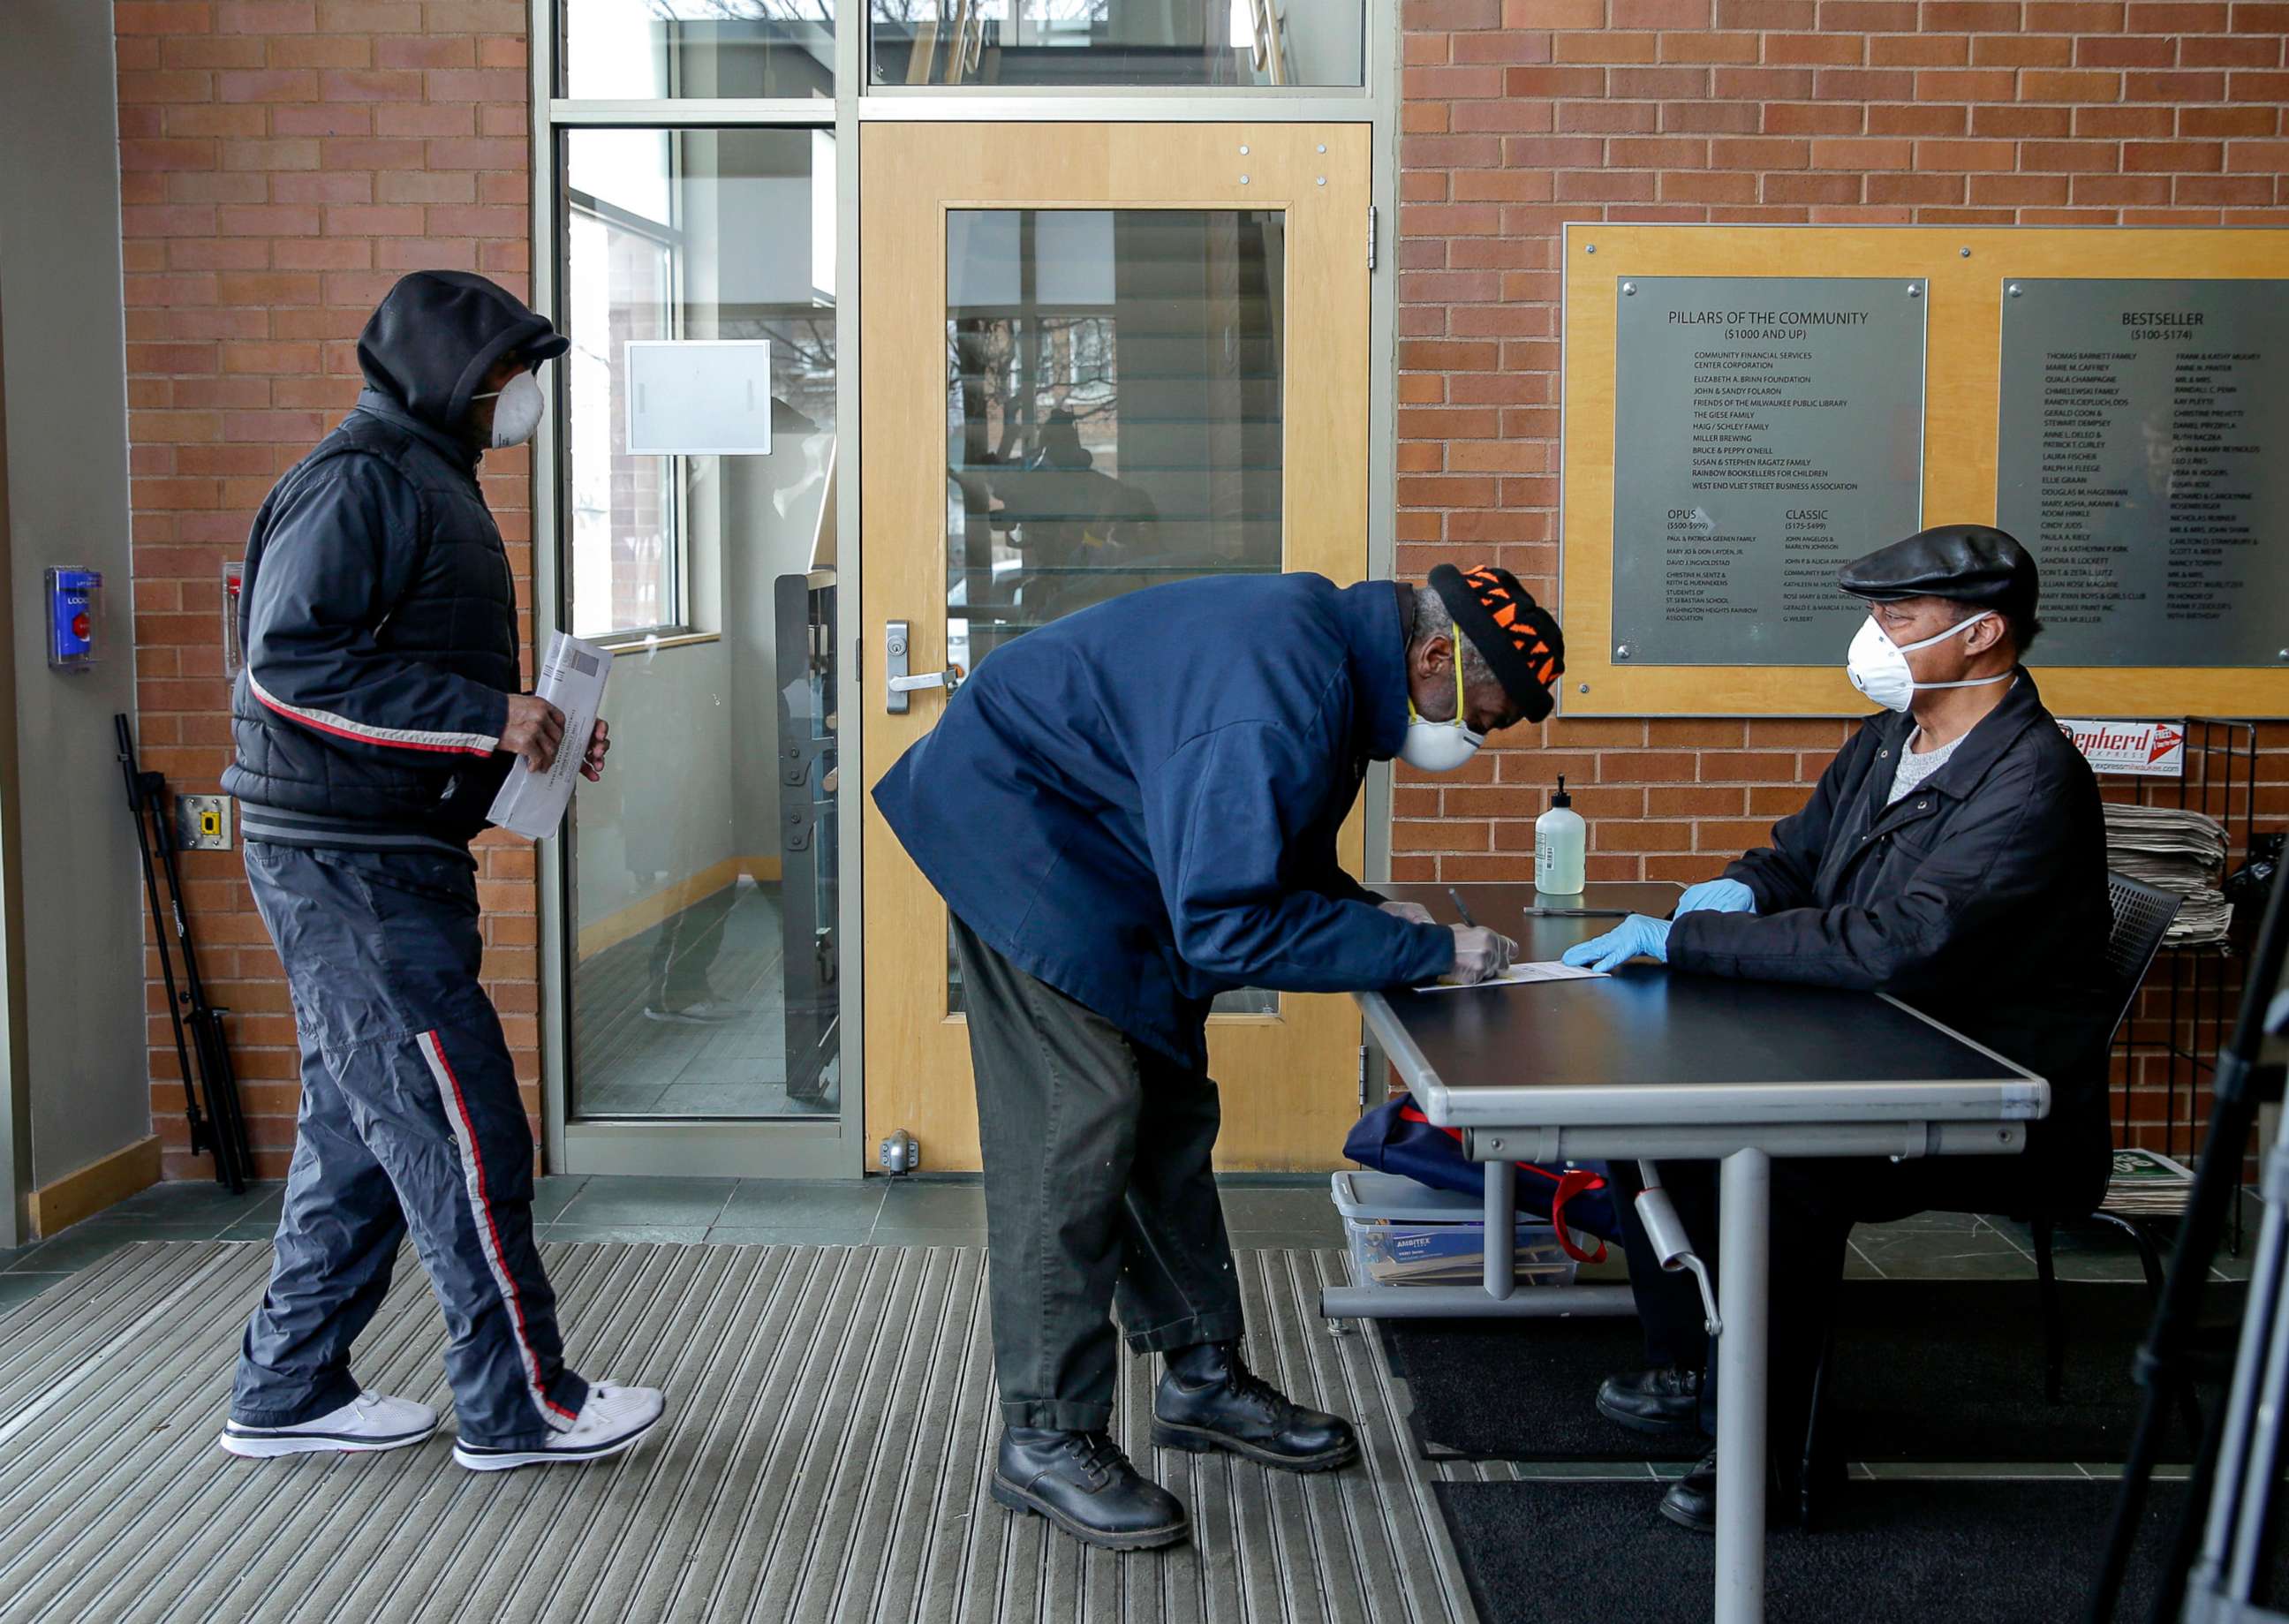 PHOTO: Voters come to drop their ballots with face masks, April 4, 2020, at the Washington Park Library in Milwaukee.